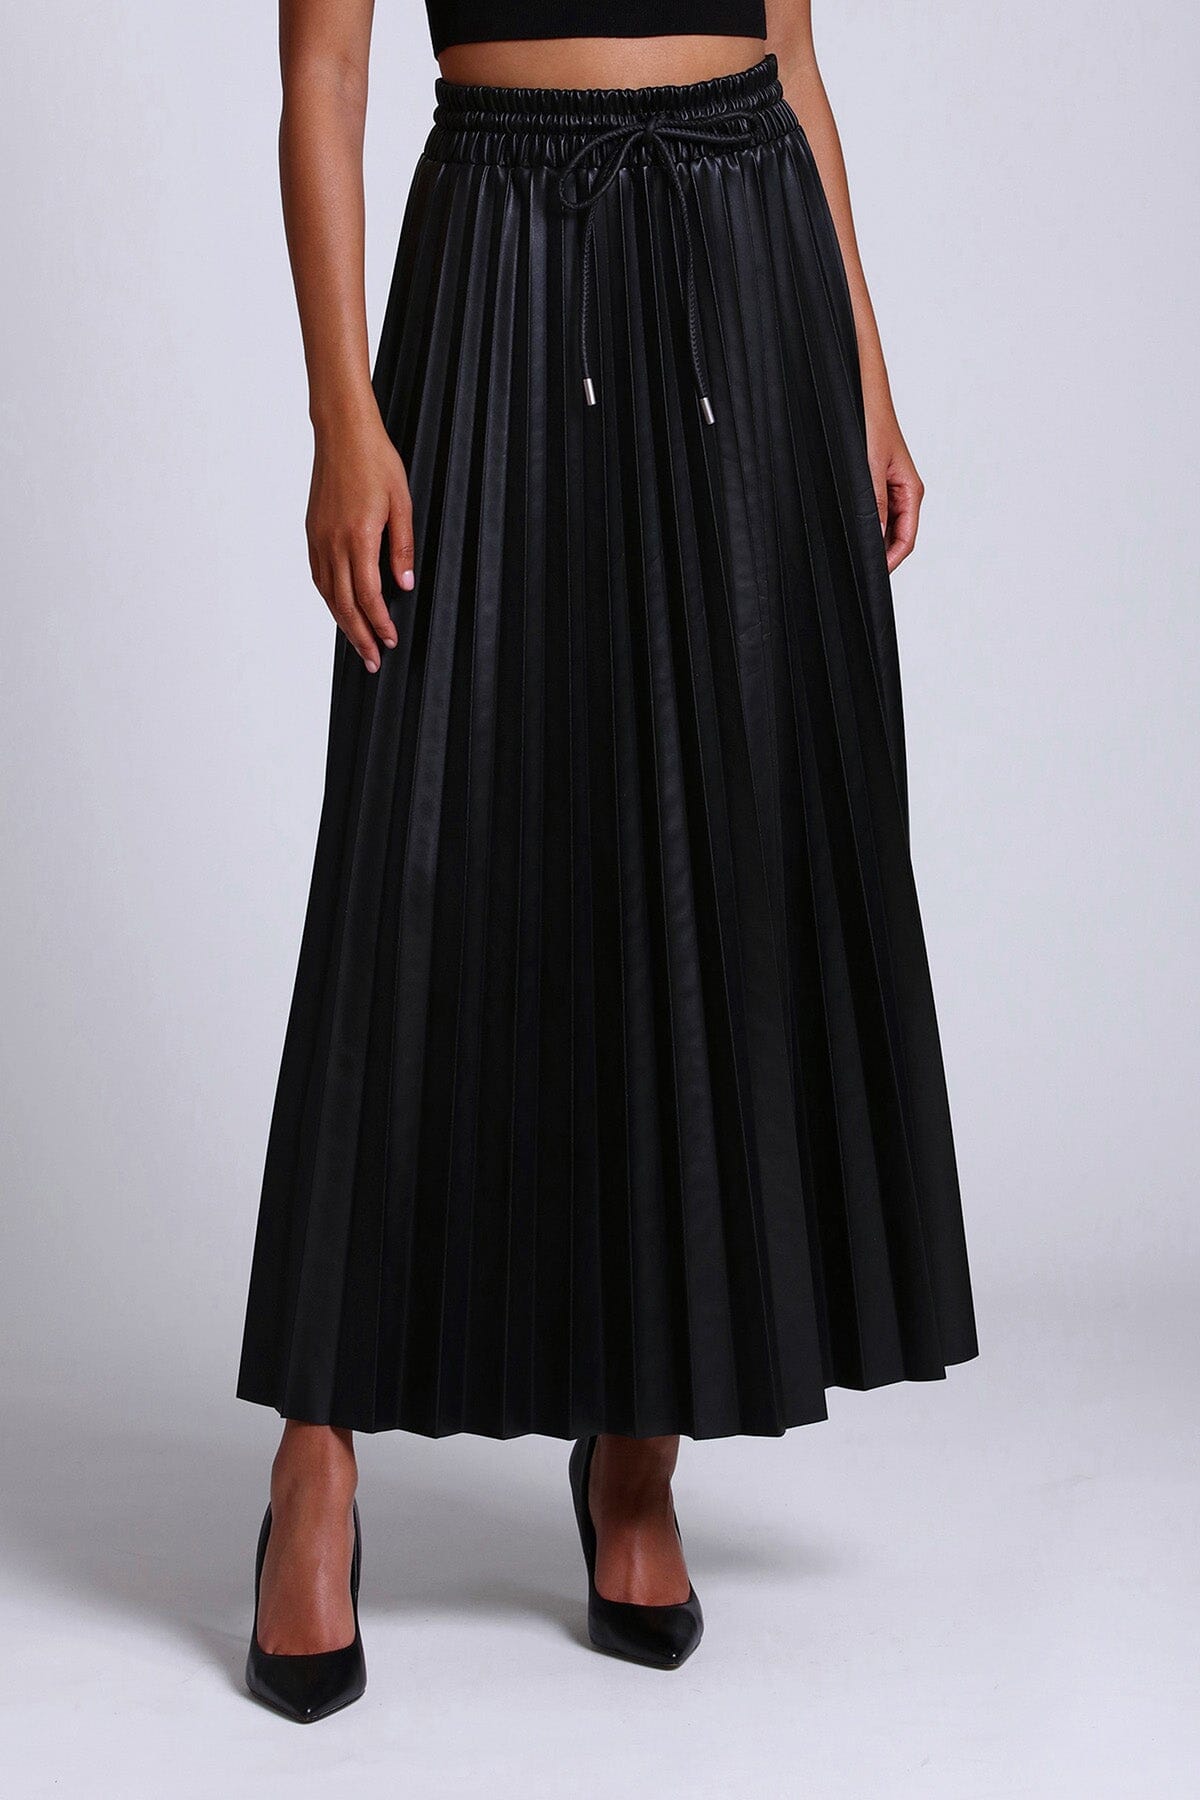 Black faux ever vegan leather pleated maxi skirt - women's figure flattering day to night skirts for fall 2023